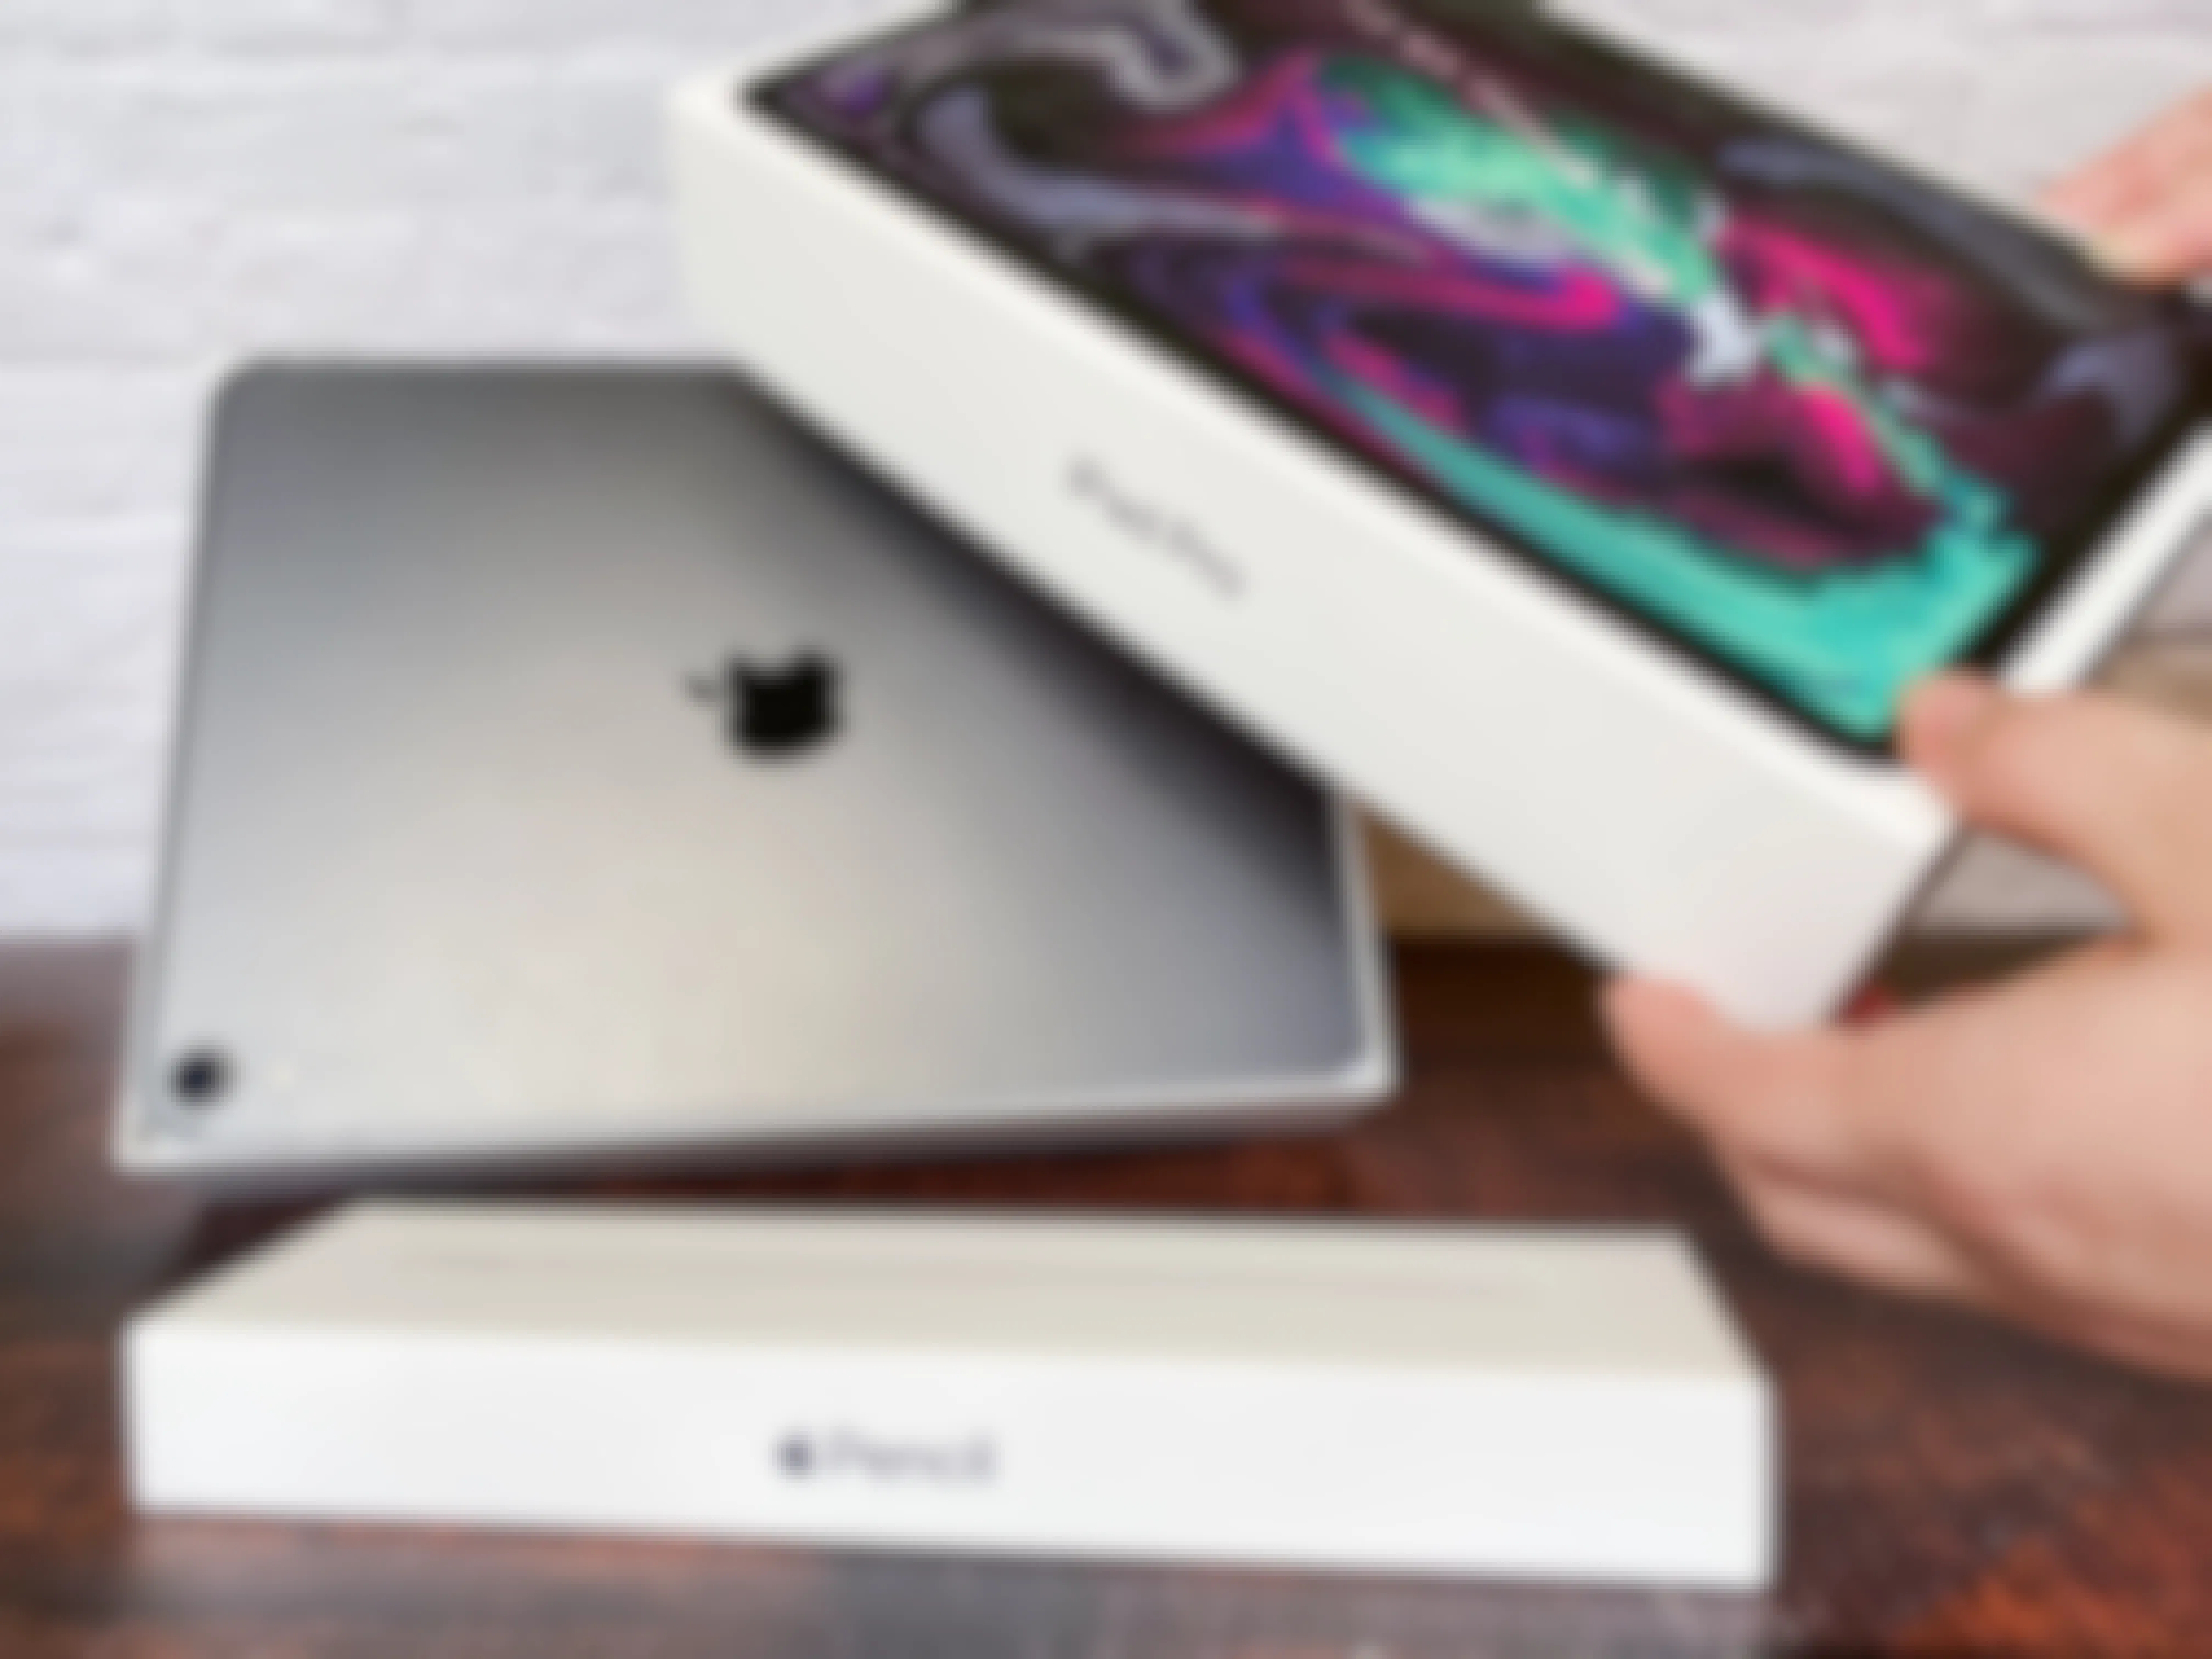 apple-products-refurbished-buying-used-program-explainer-ipad-pro-macbook-air-pencil-iphone-11-pro-boxes-2